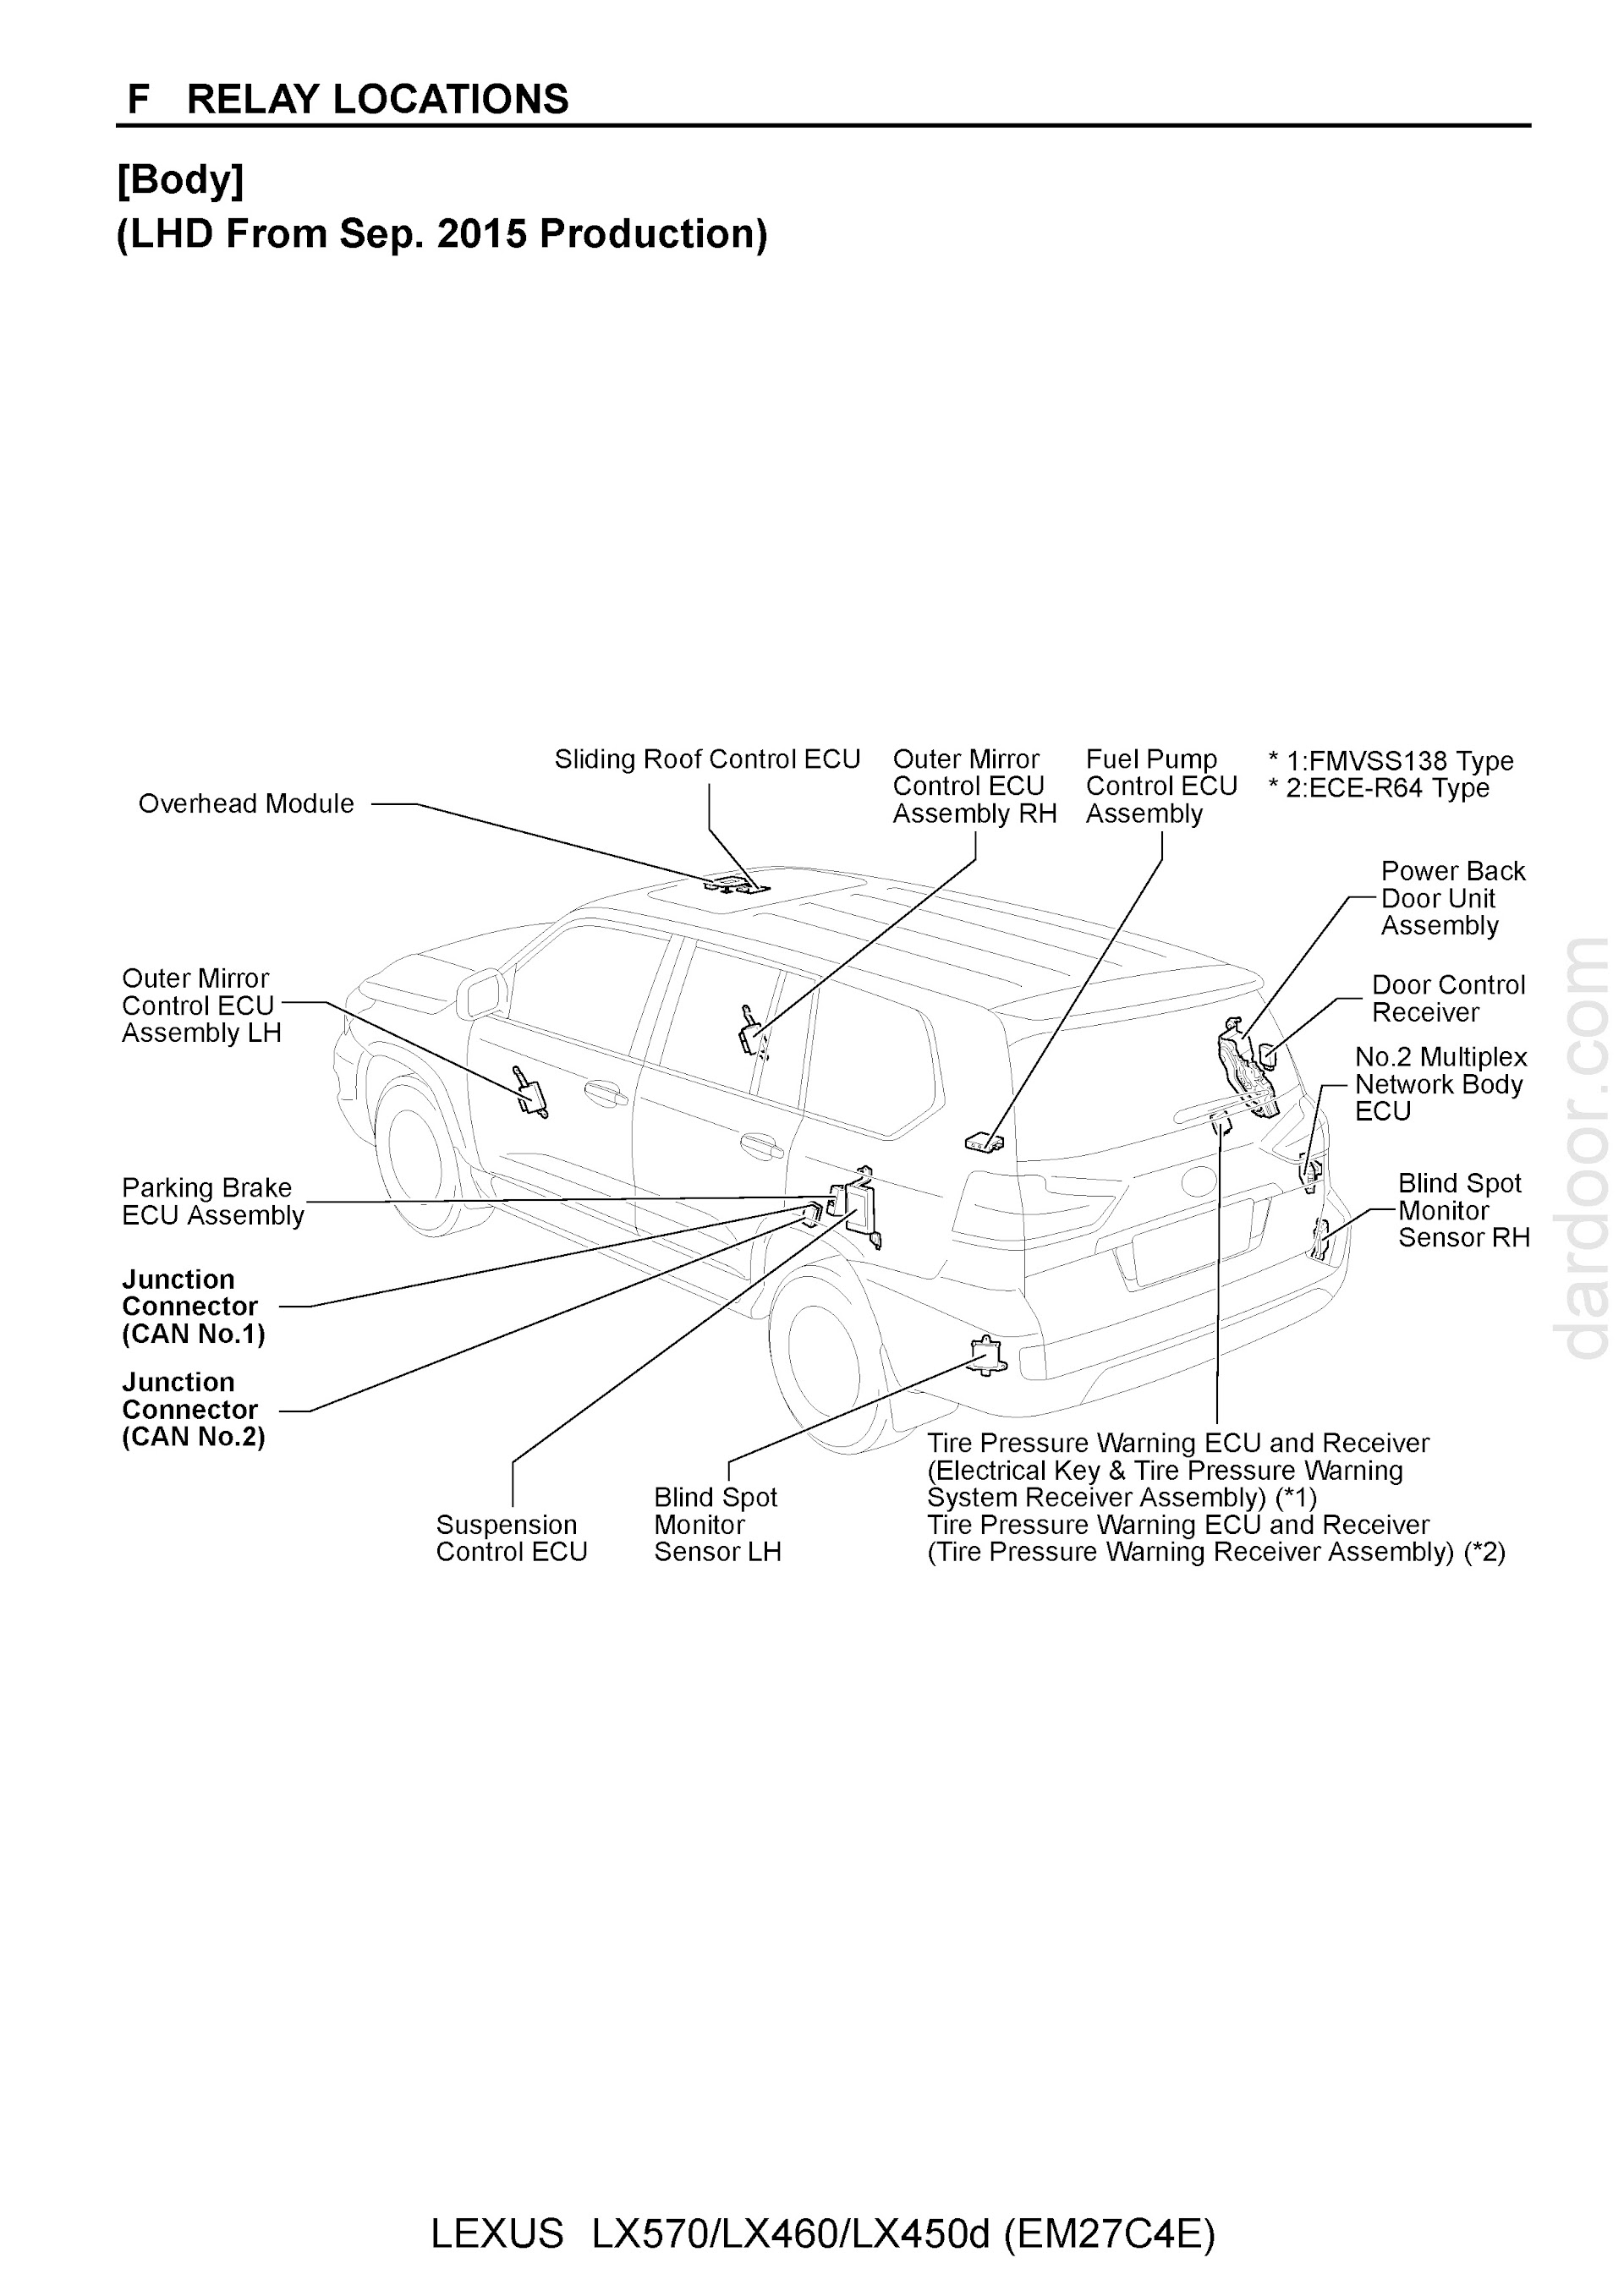 2018 Lexus LX 570 and LX 460 Wiring Diagram, Relay Location in The Body